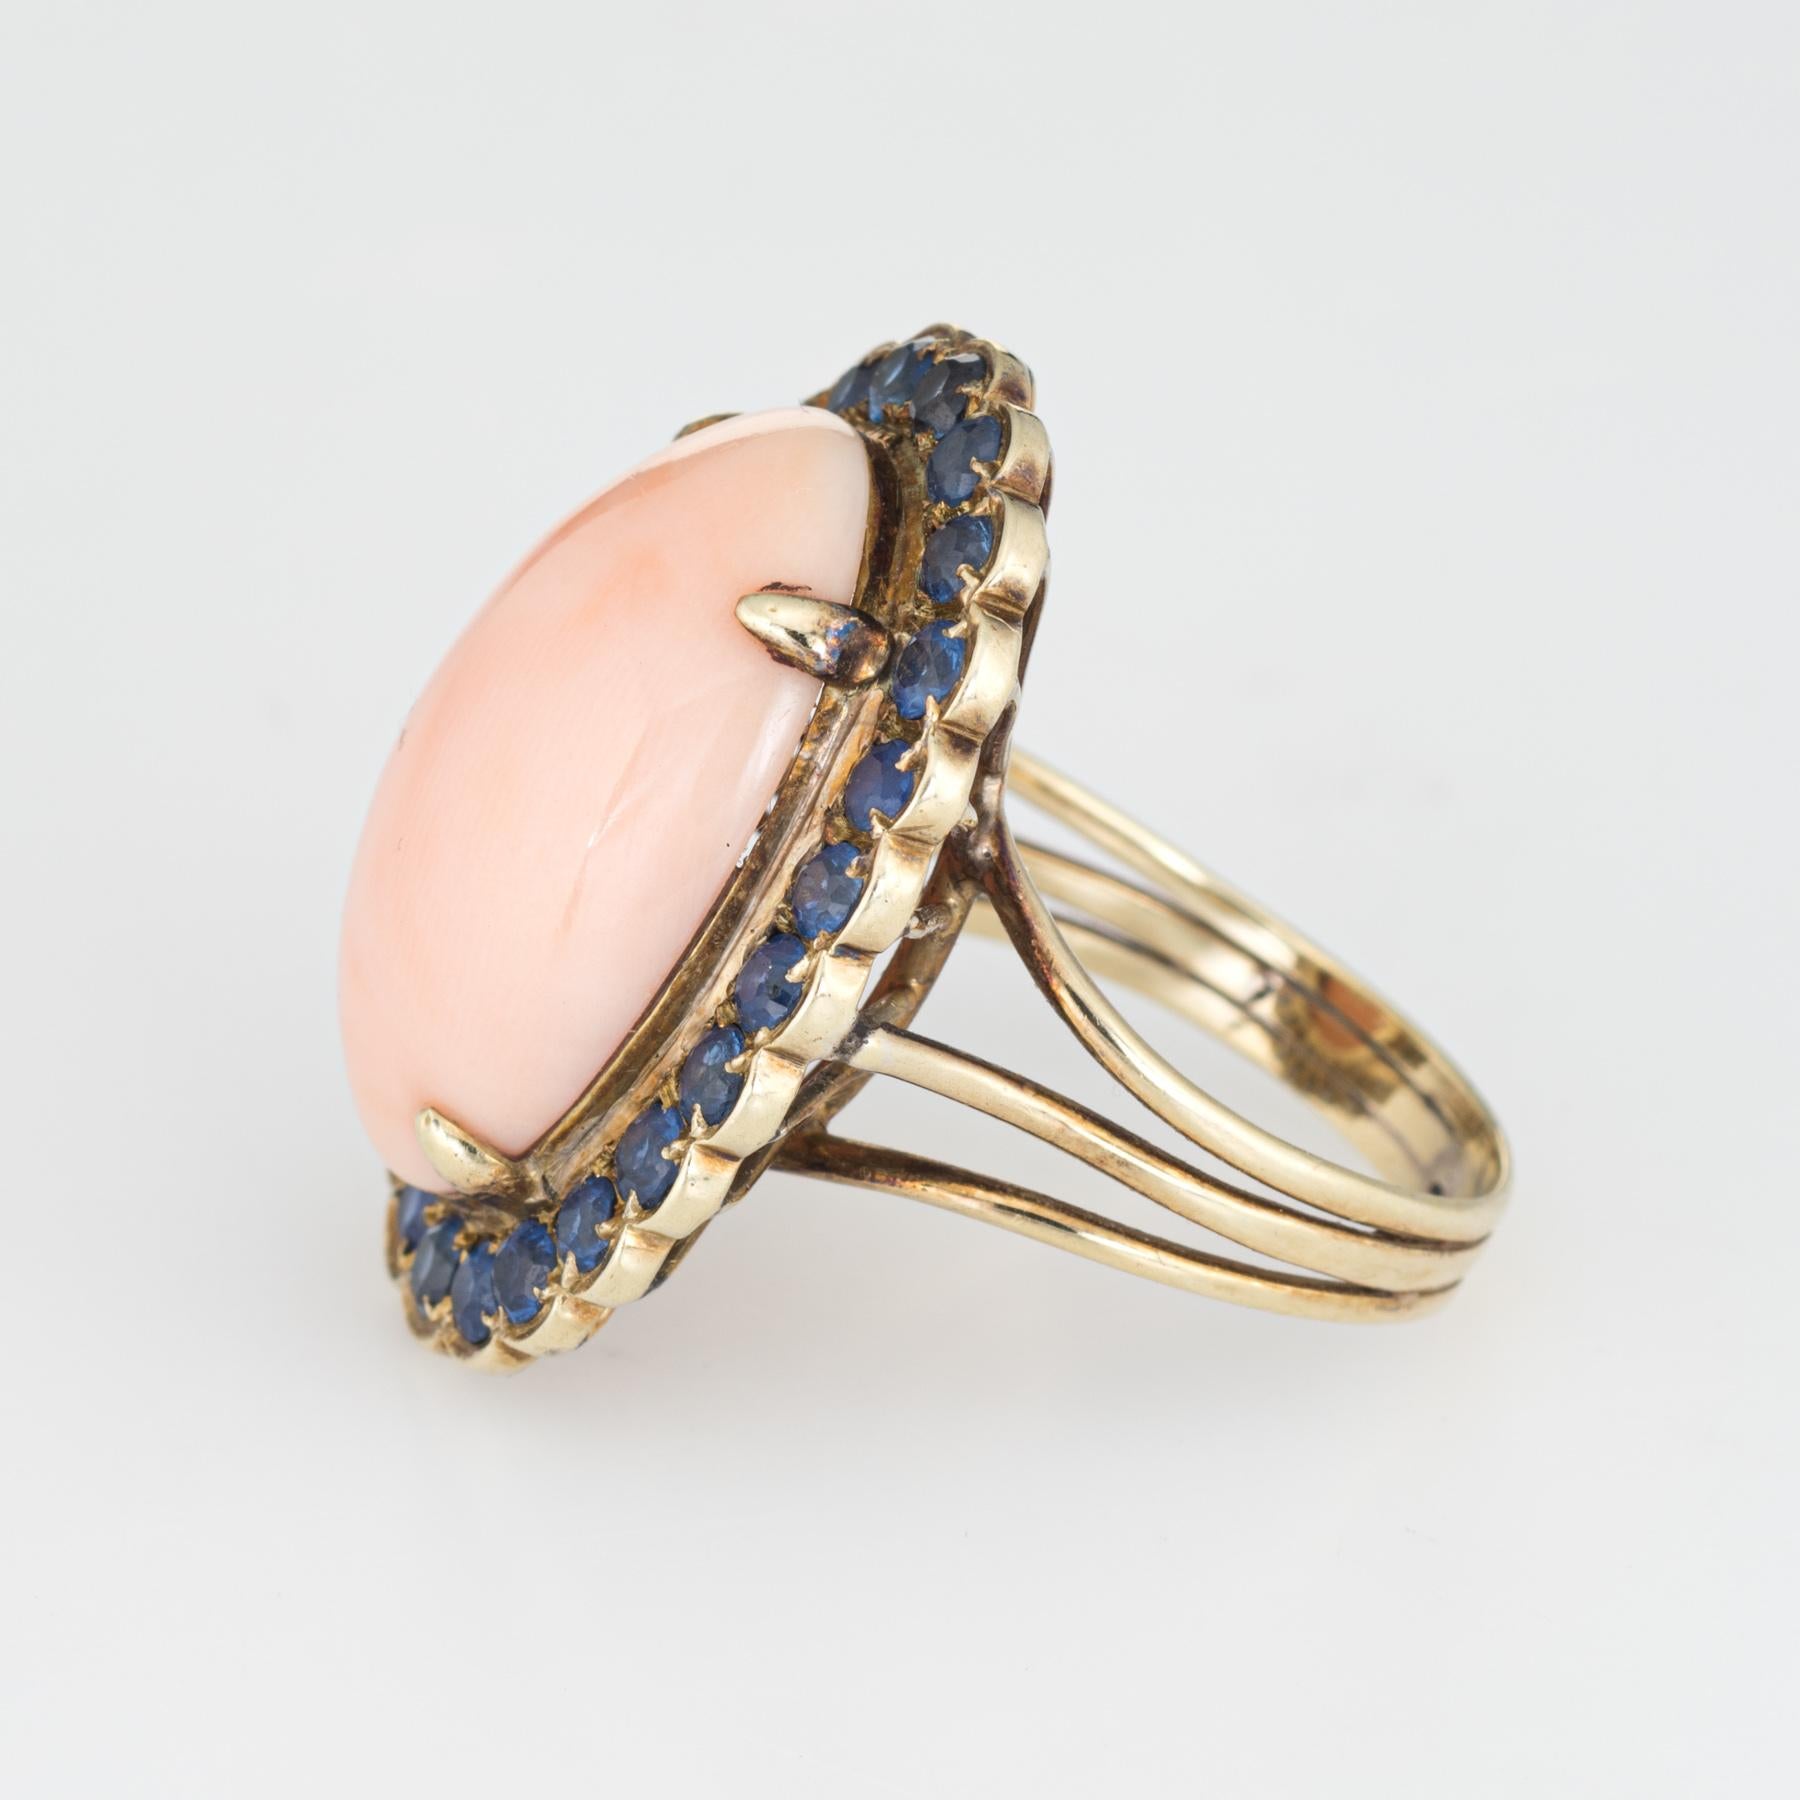 Modern Angel Skin Coral Sapphire Ring Vintage 14k Yellow Gold Oval Cocktail Jewelry